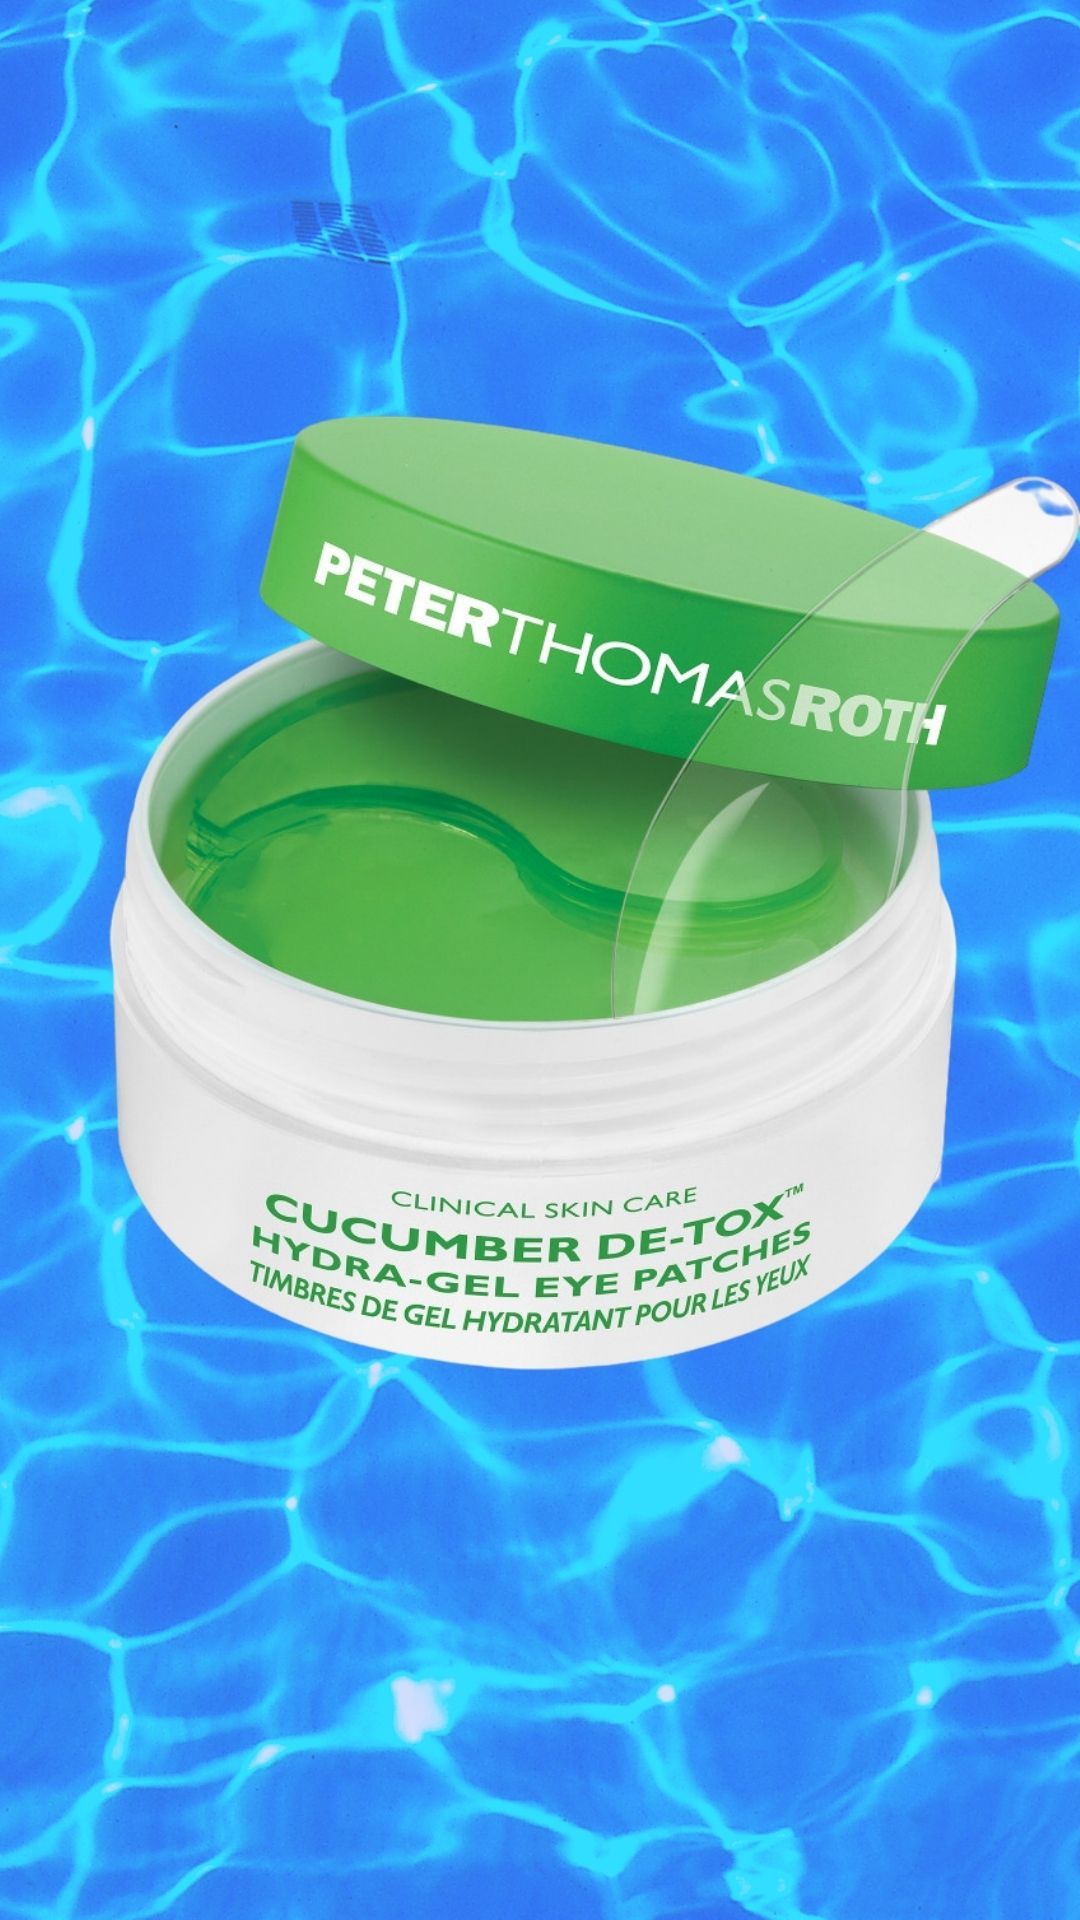 Peter Thomas Roth Cucumber Detox HydraGel Patches, blue background